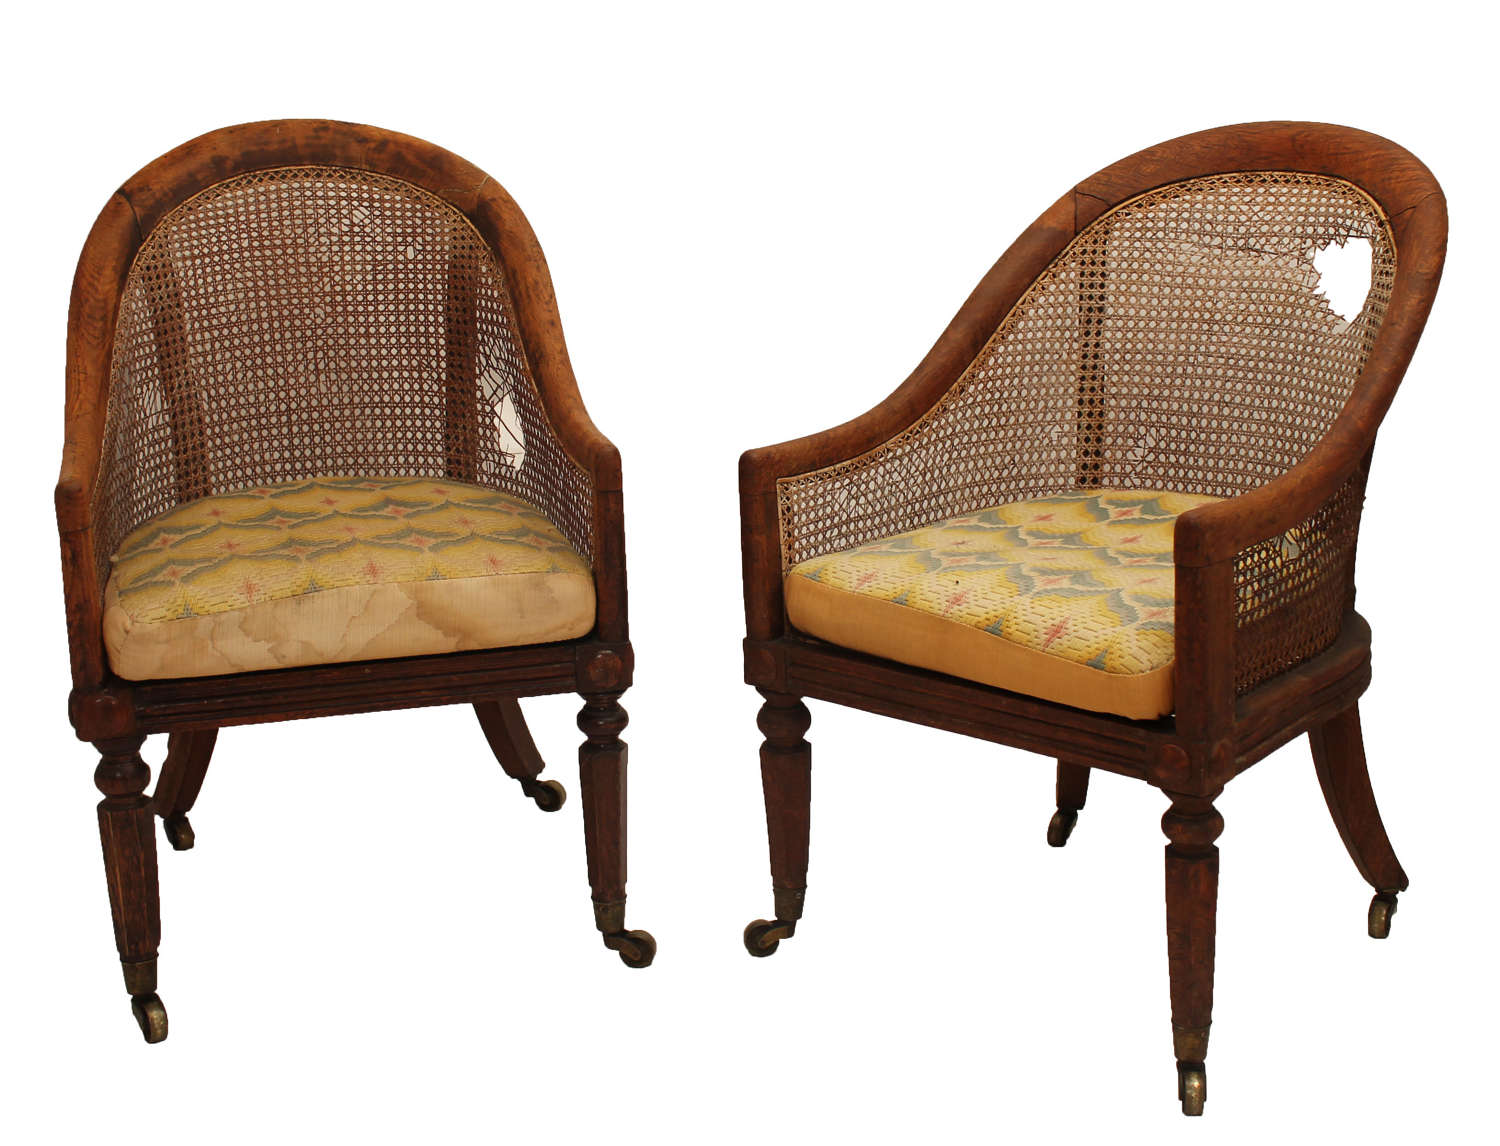 Pair of Gillow Library Bergere chairs